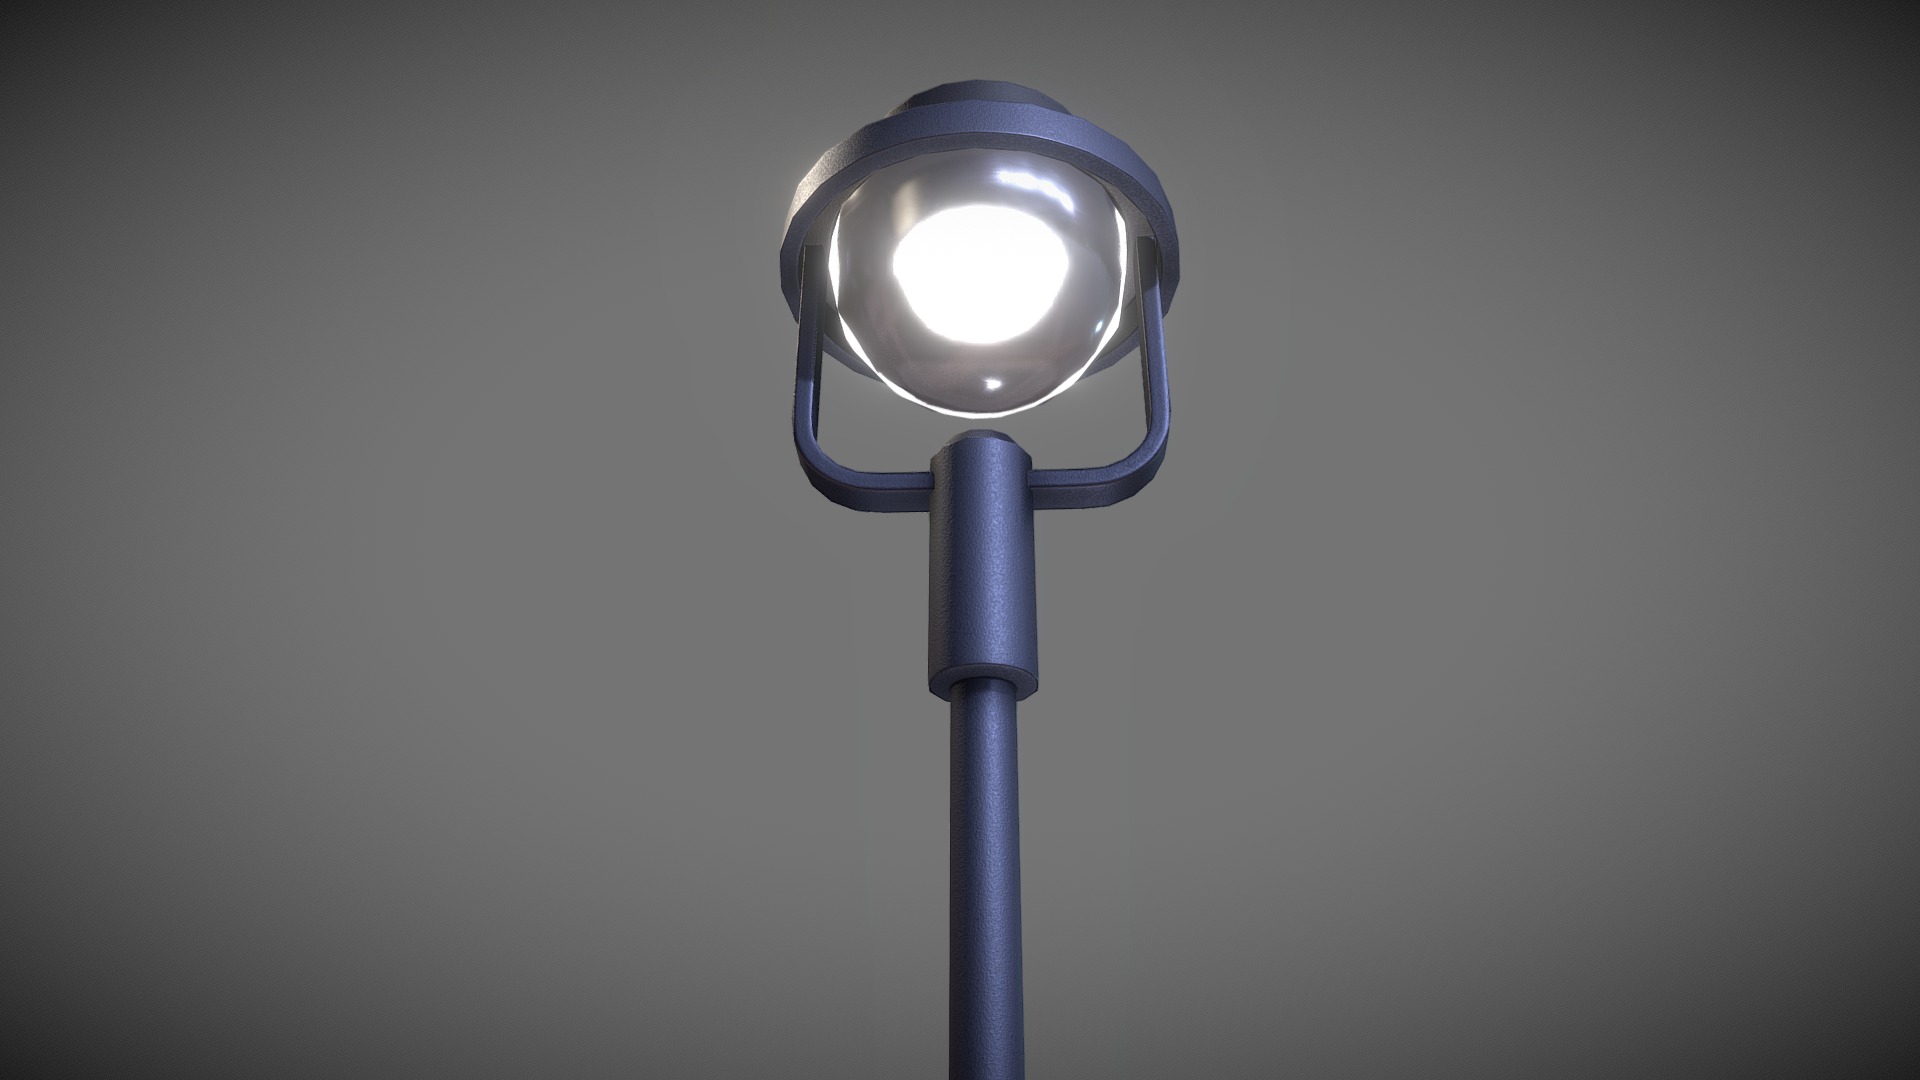 3D model Street Light (5) Low-Poly Version - This is a 3D model of the Street Light (5) Low-Poly Version. The 3D model is about a light on a pole.